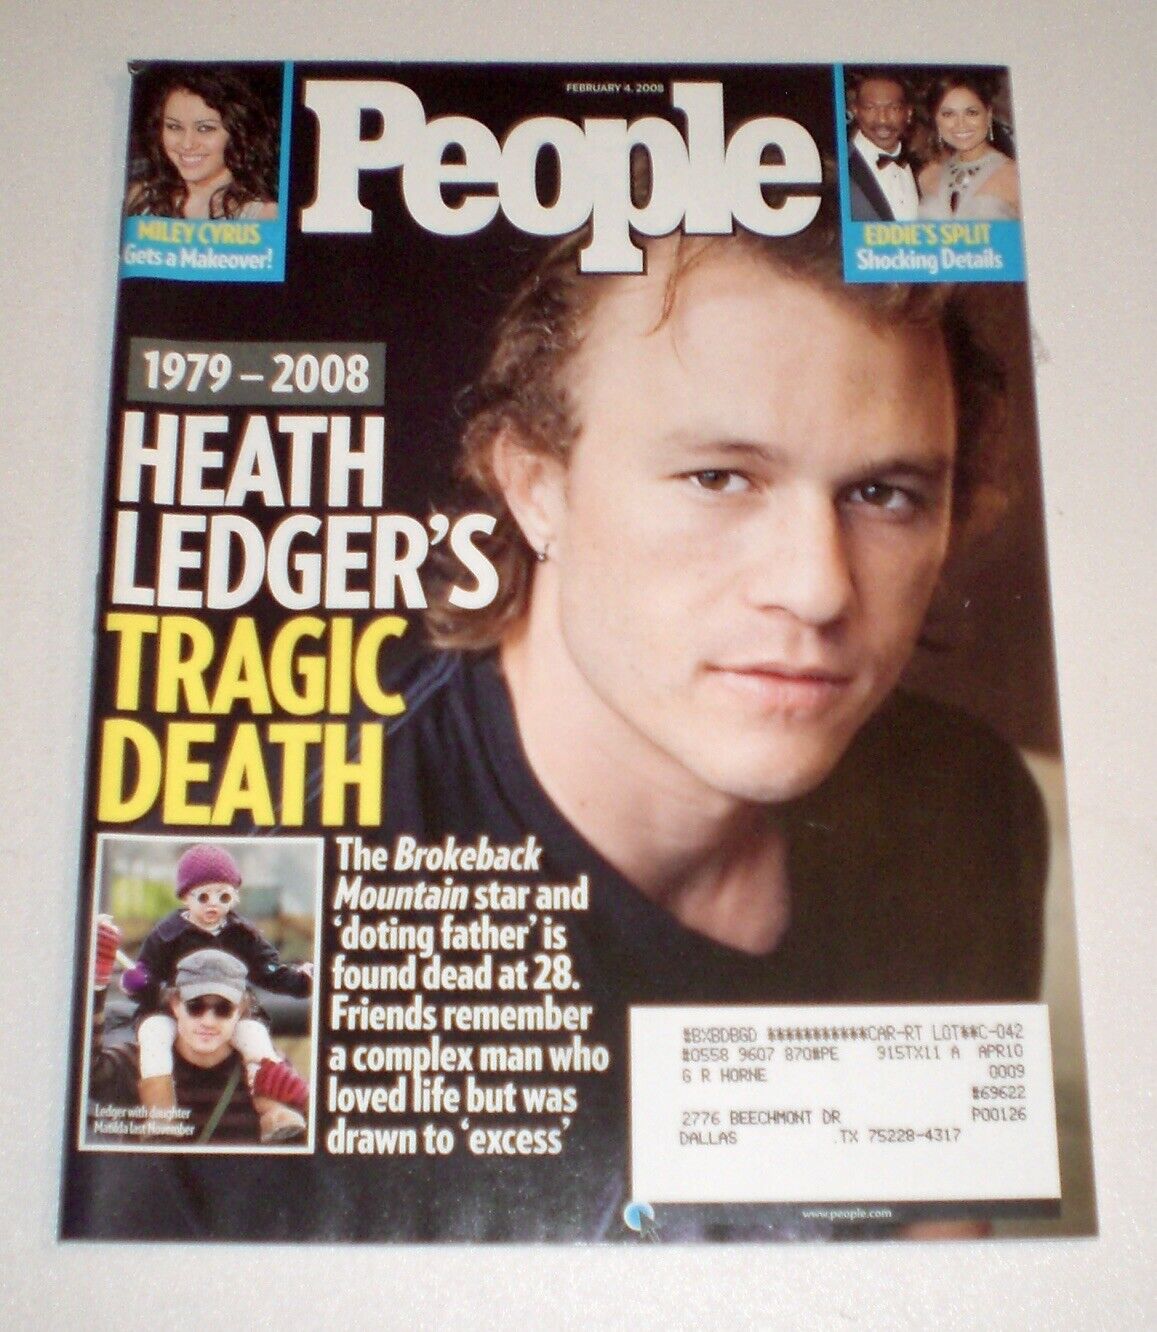 Stephen Gaghan Reveals New Details About Heath Ledger's Death